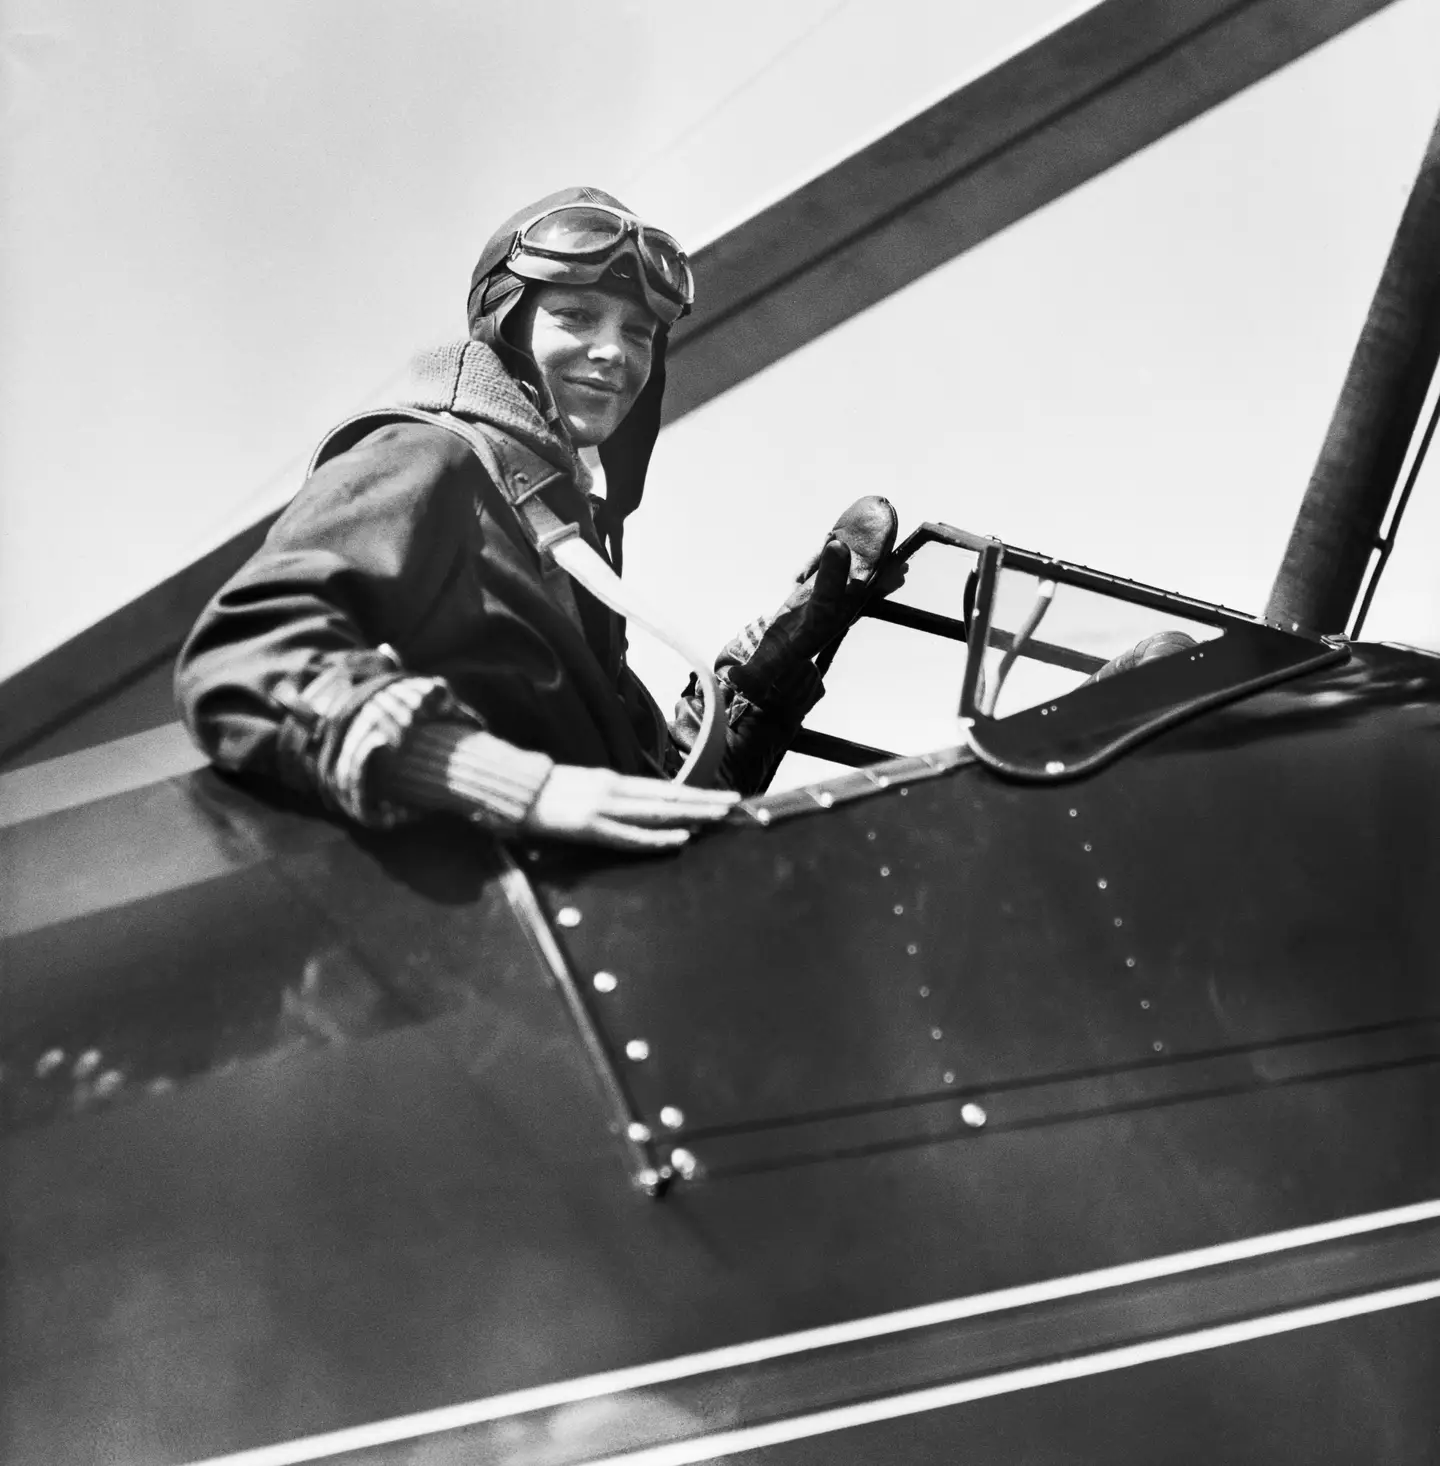 Amelia Earhart was the first woman to fly around the globe.